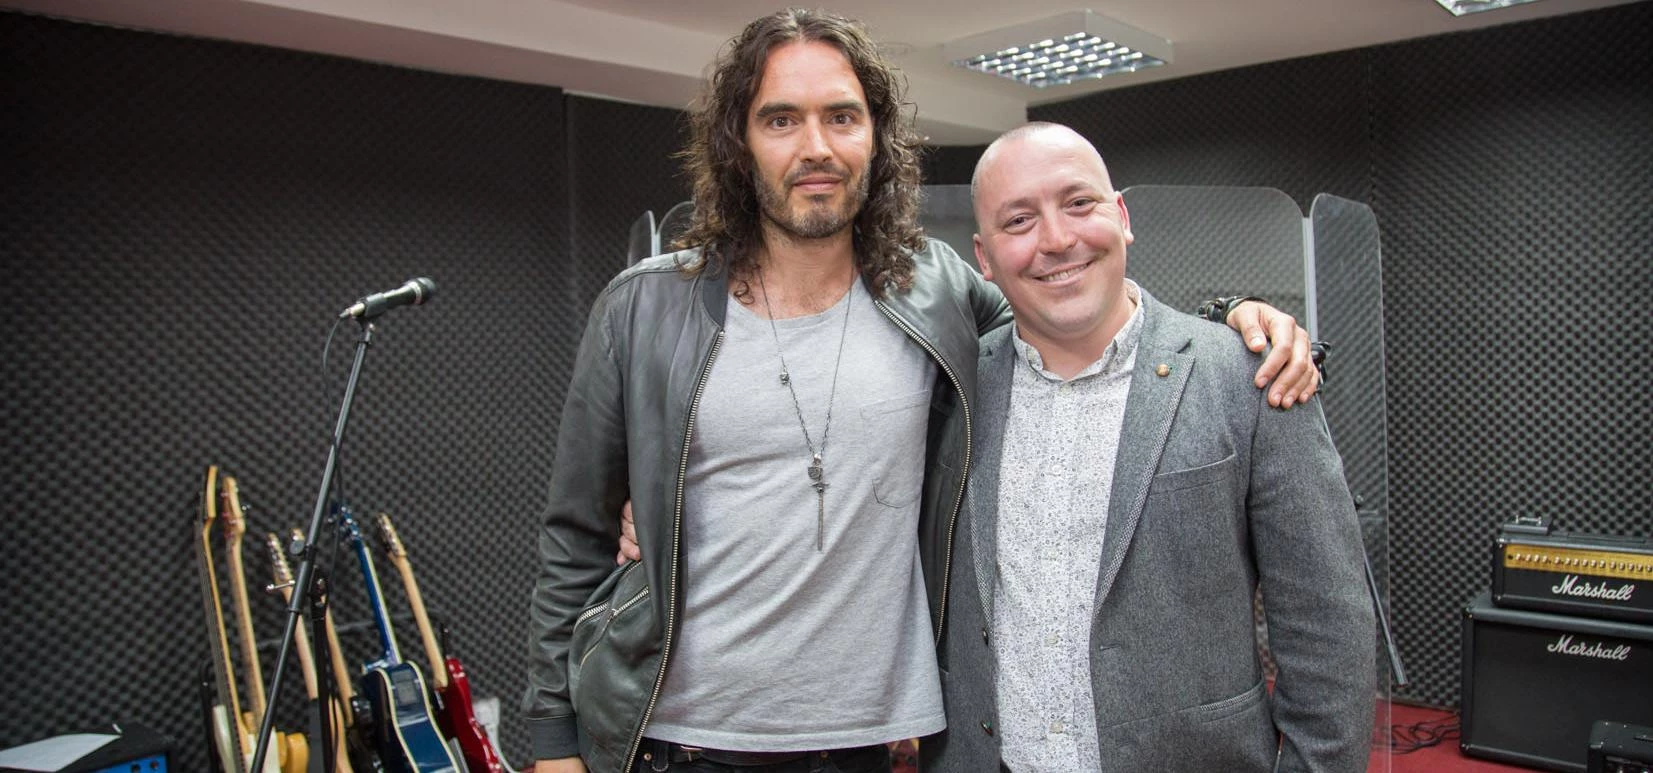 Russell Brand with Steve Dixon, founder of Changes UK 